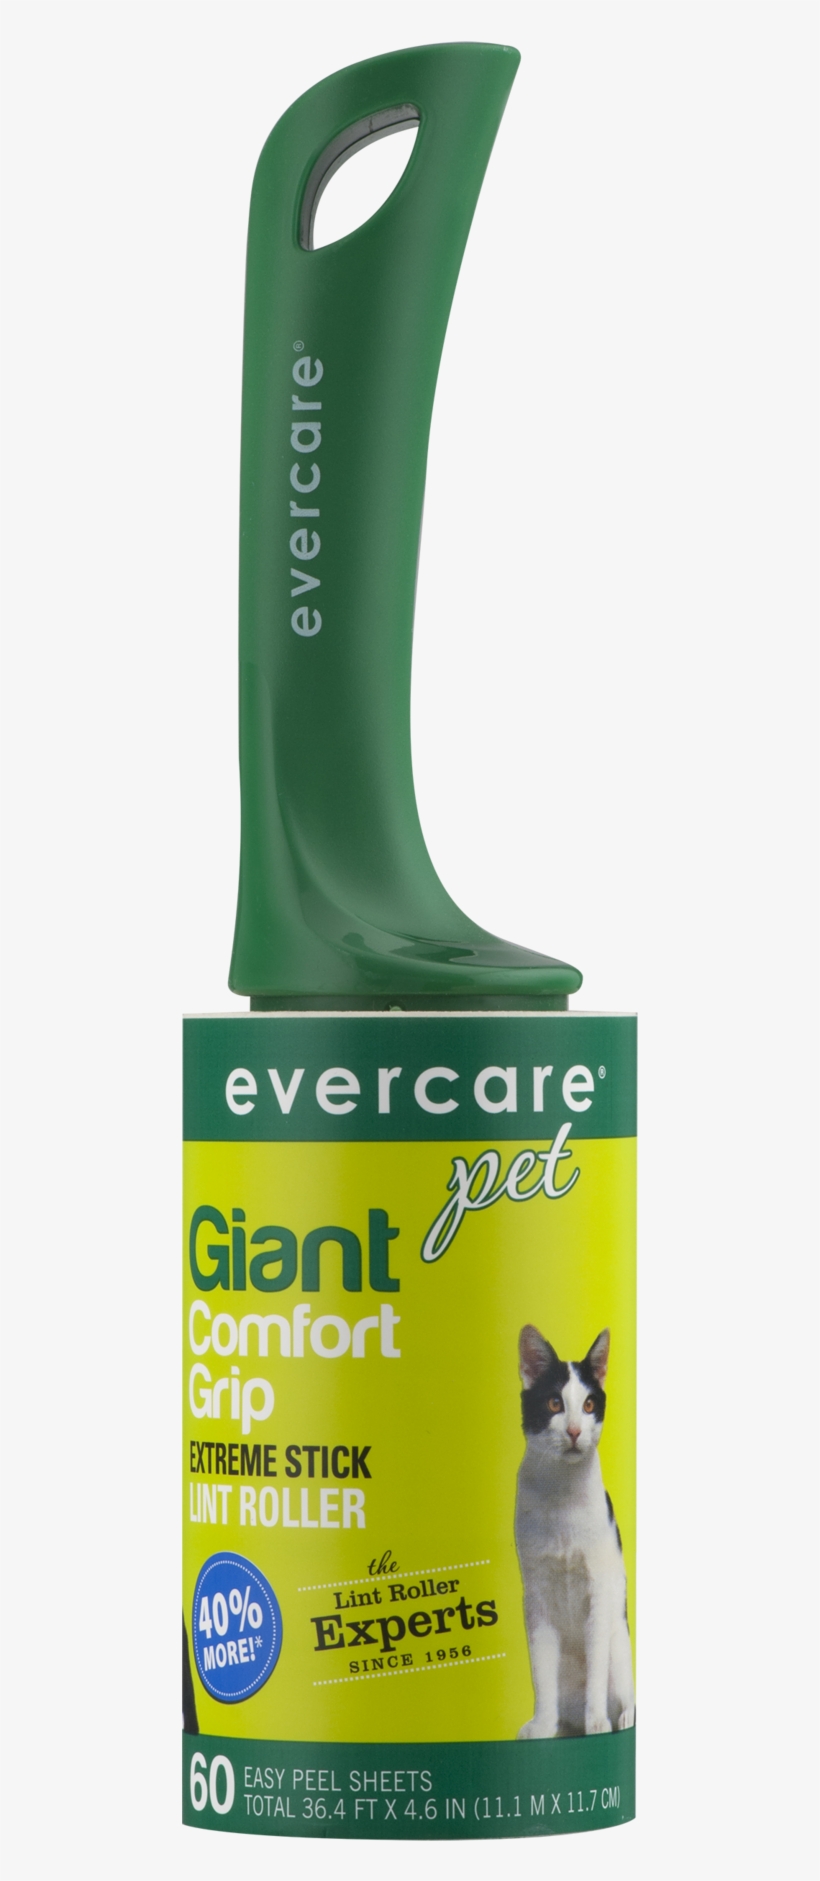 Evercare Pet Giant Comfort Grip Extreme Stick Lint - Evercare Ergo Grip Extreme Stick Lint Roller, 60 Sheets, transparent png #1585362